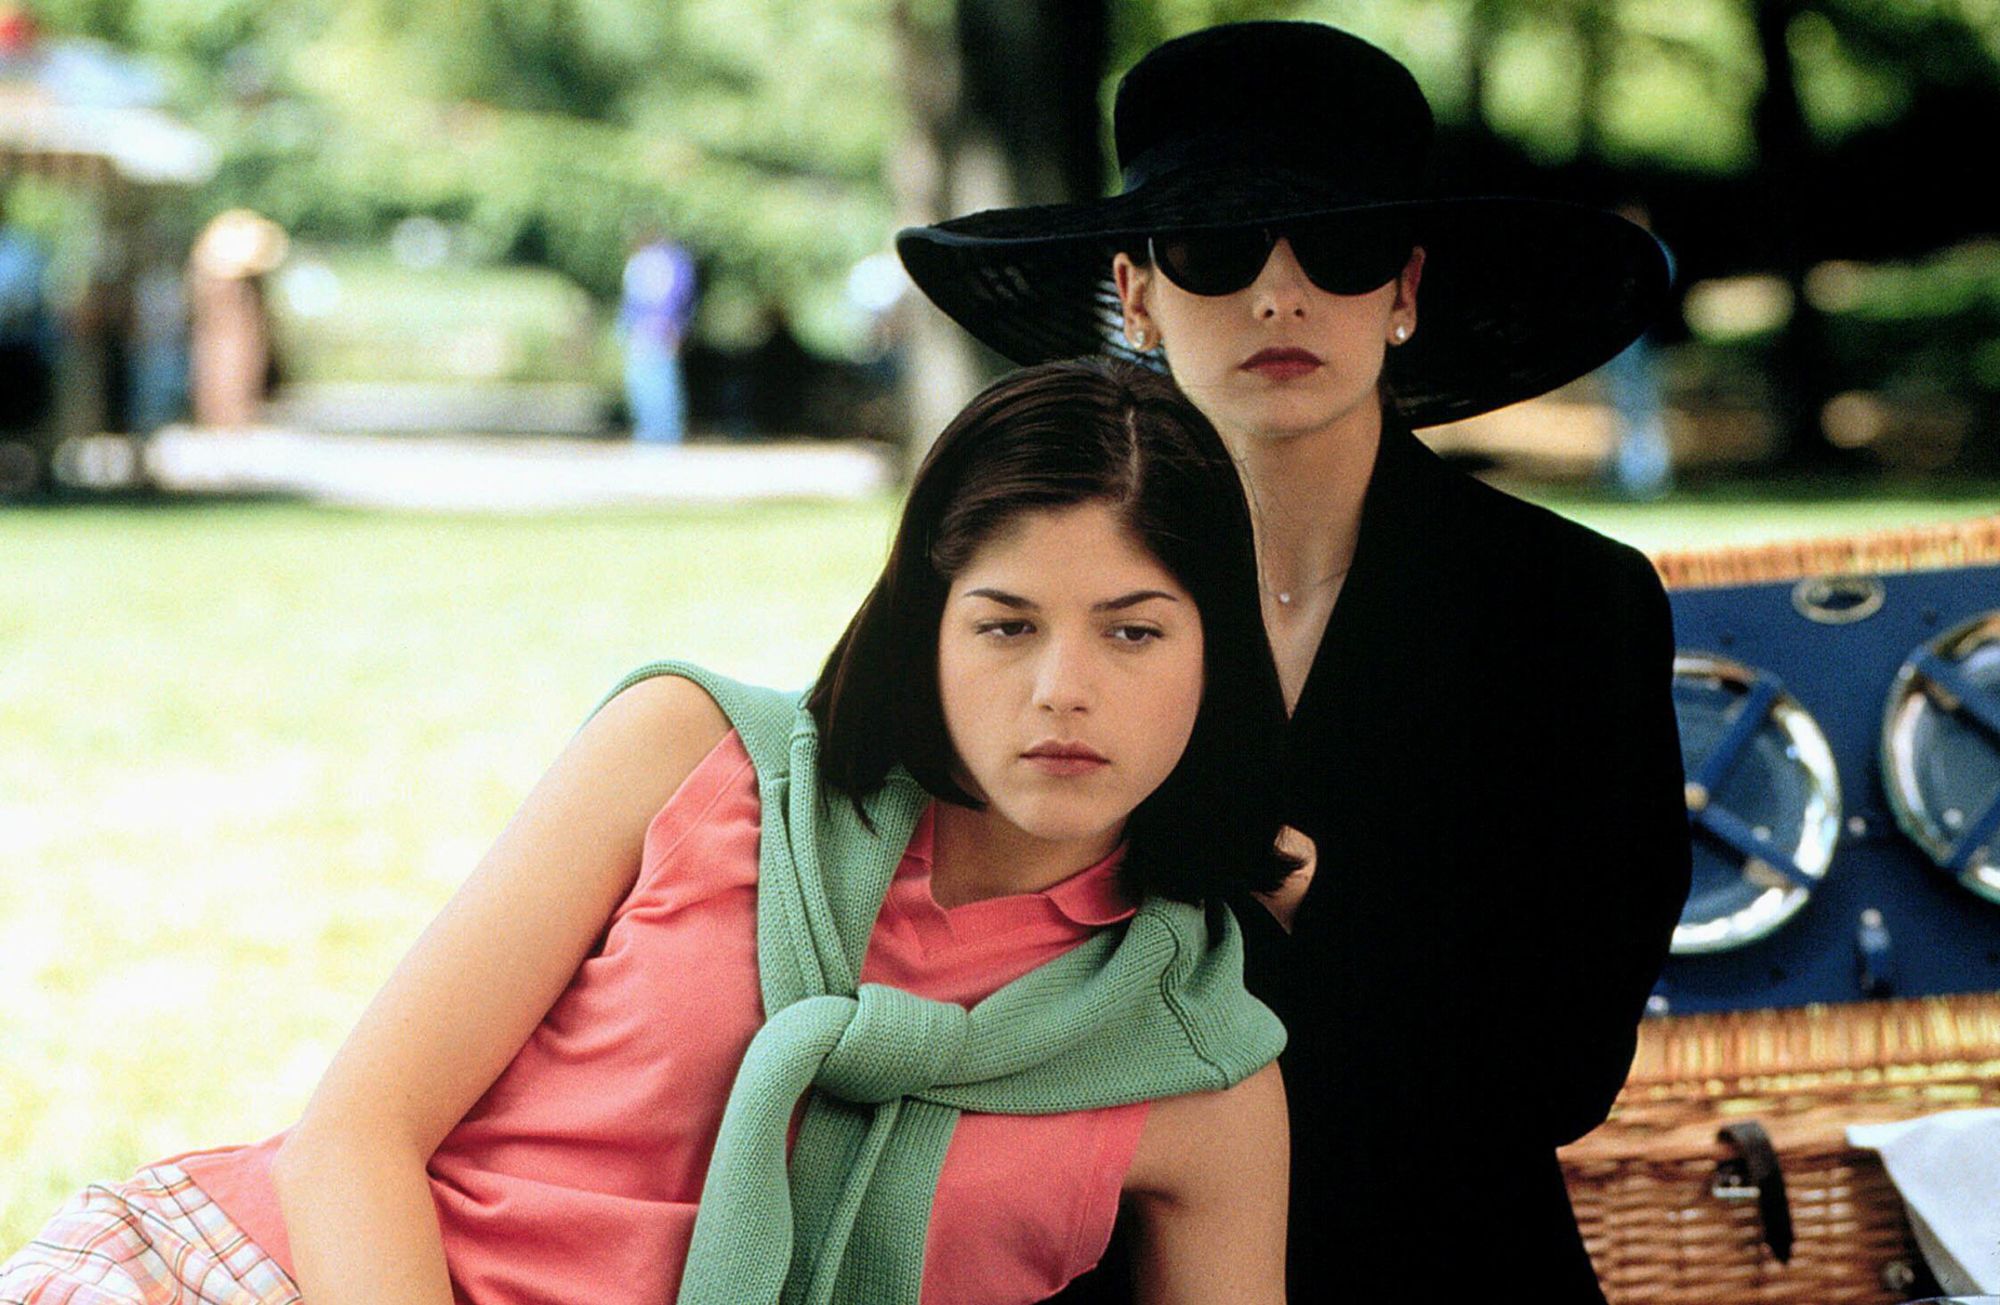 The power play between Kathryn (played by Sarah Michelle Gellar) and Cecile (Selma Blair) is only enriched by their styling in the 1999 movie Cruel Intentions.